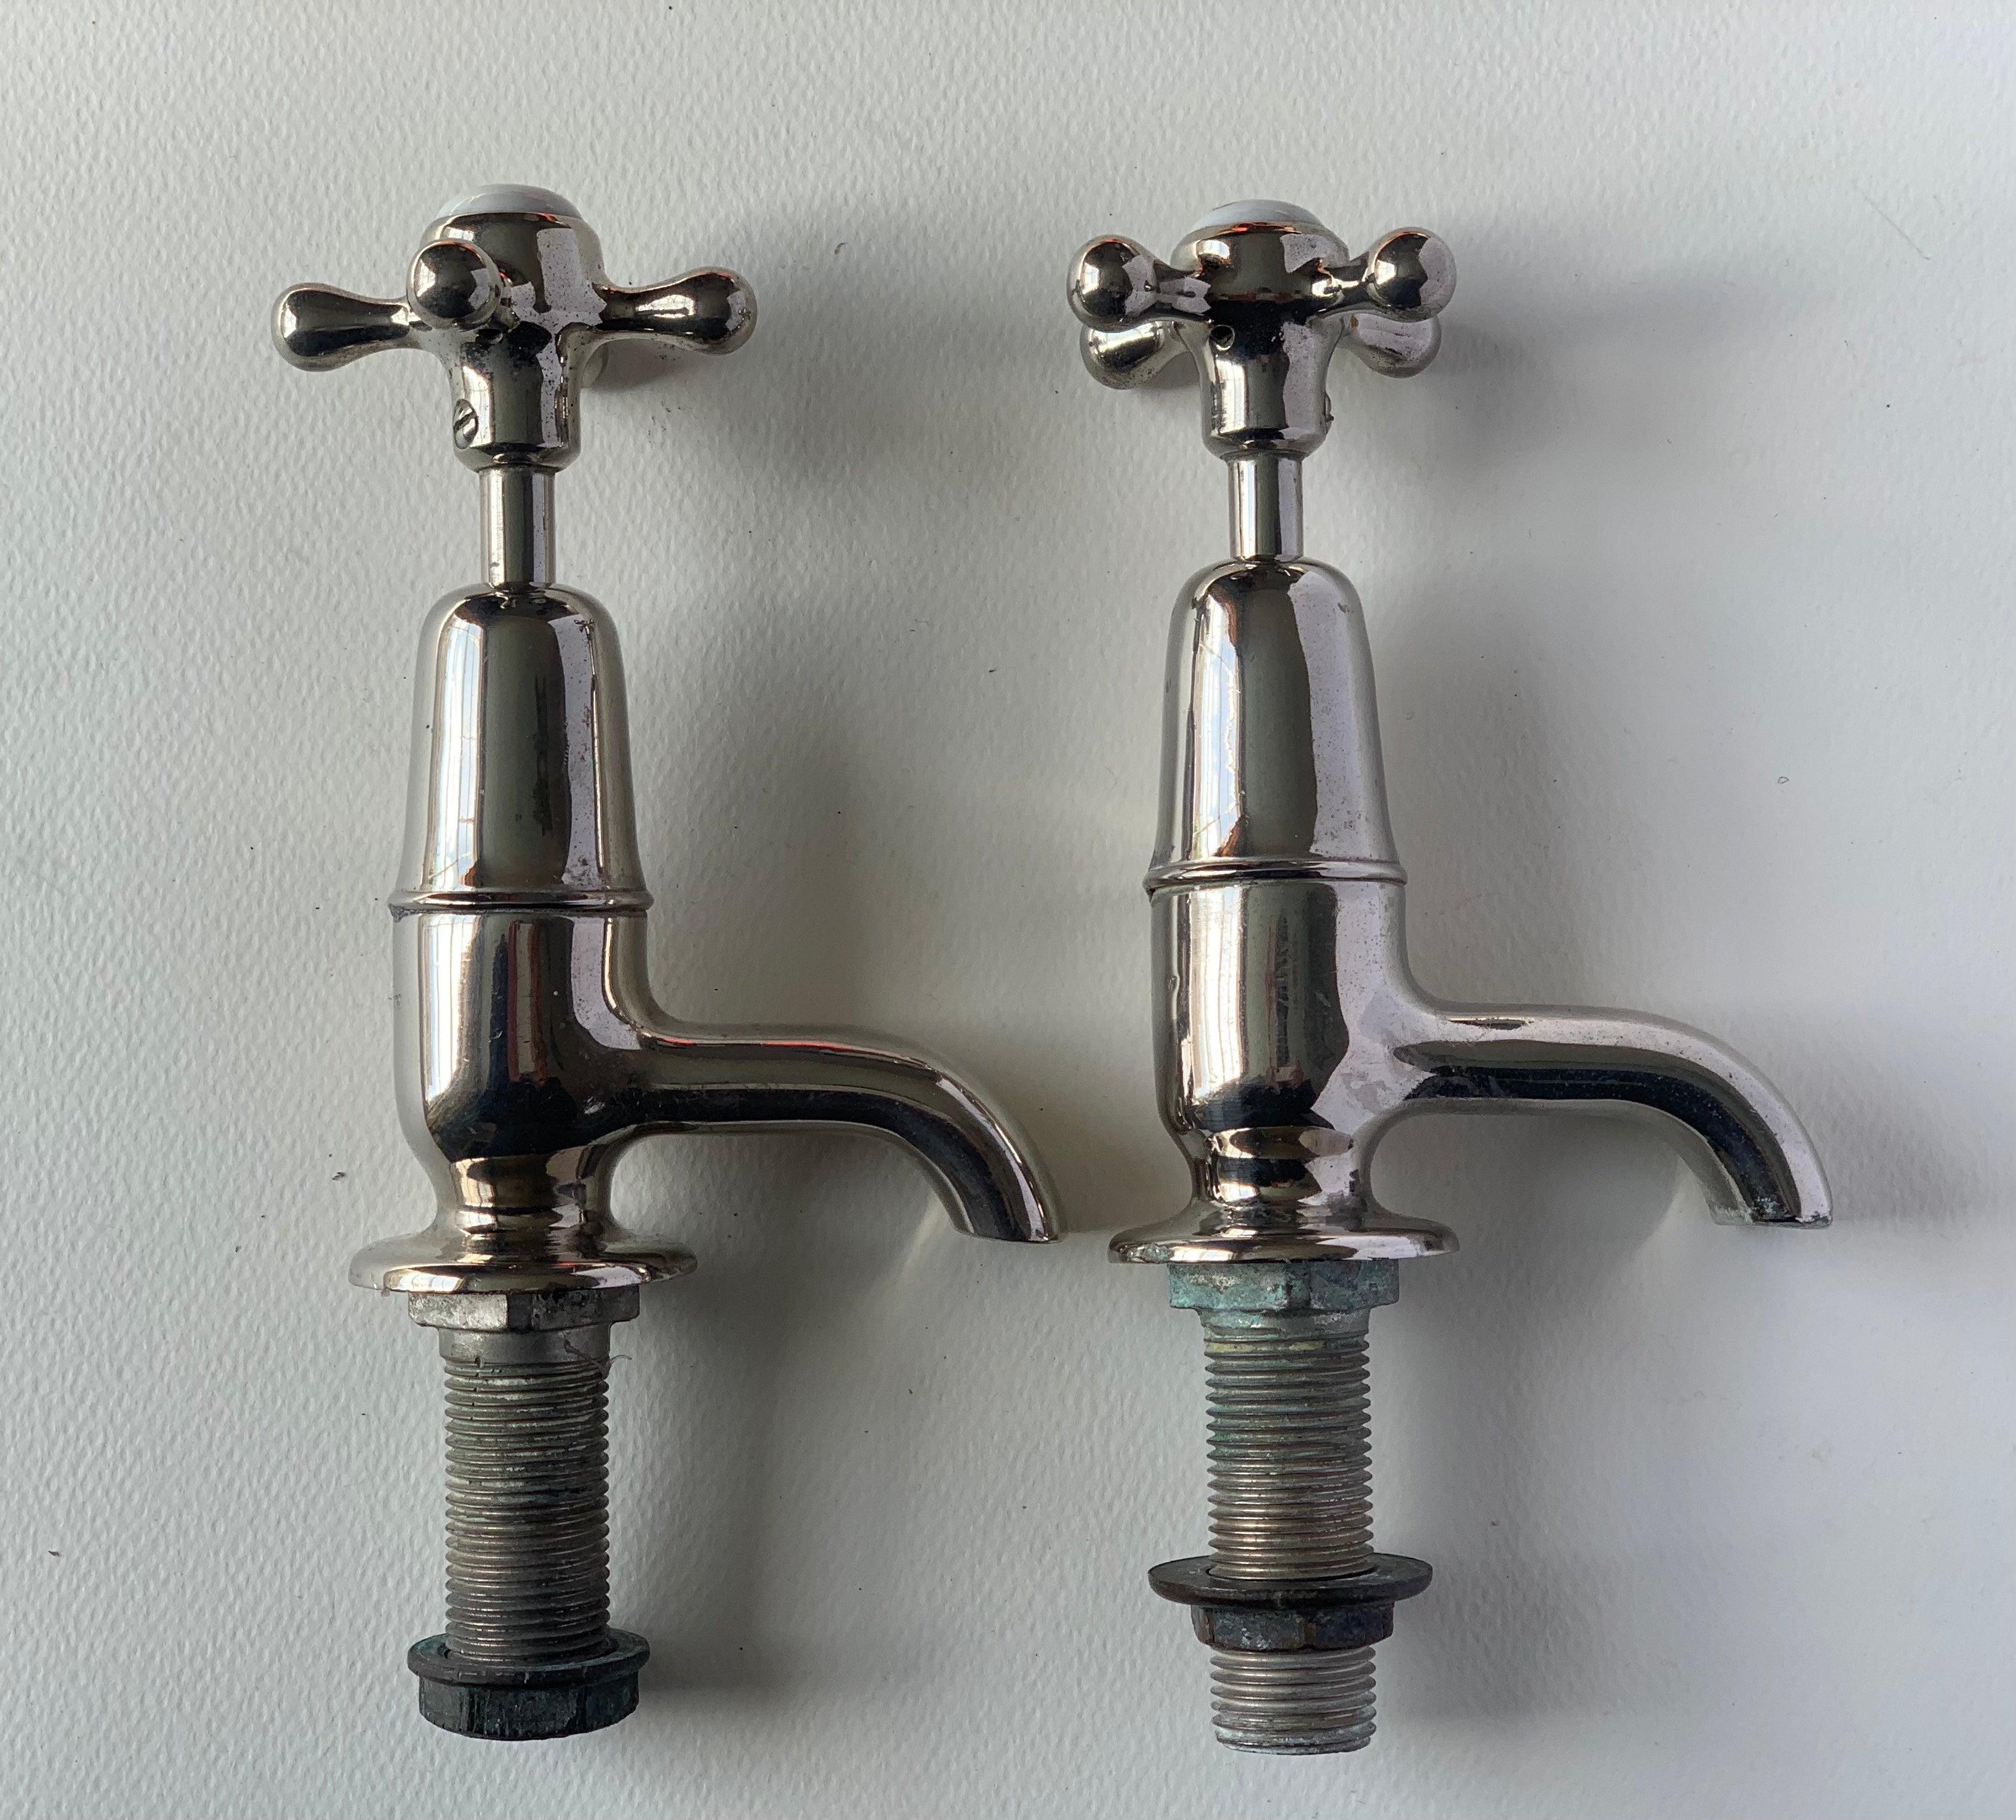 Pair of Antique Basin Taps with owl mark